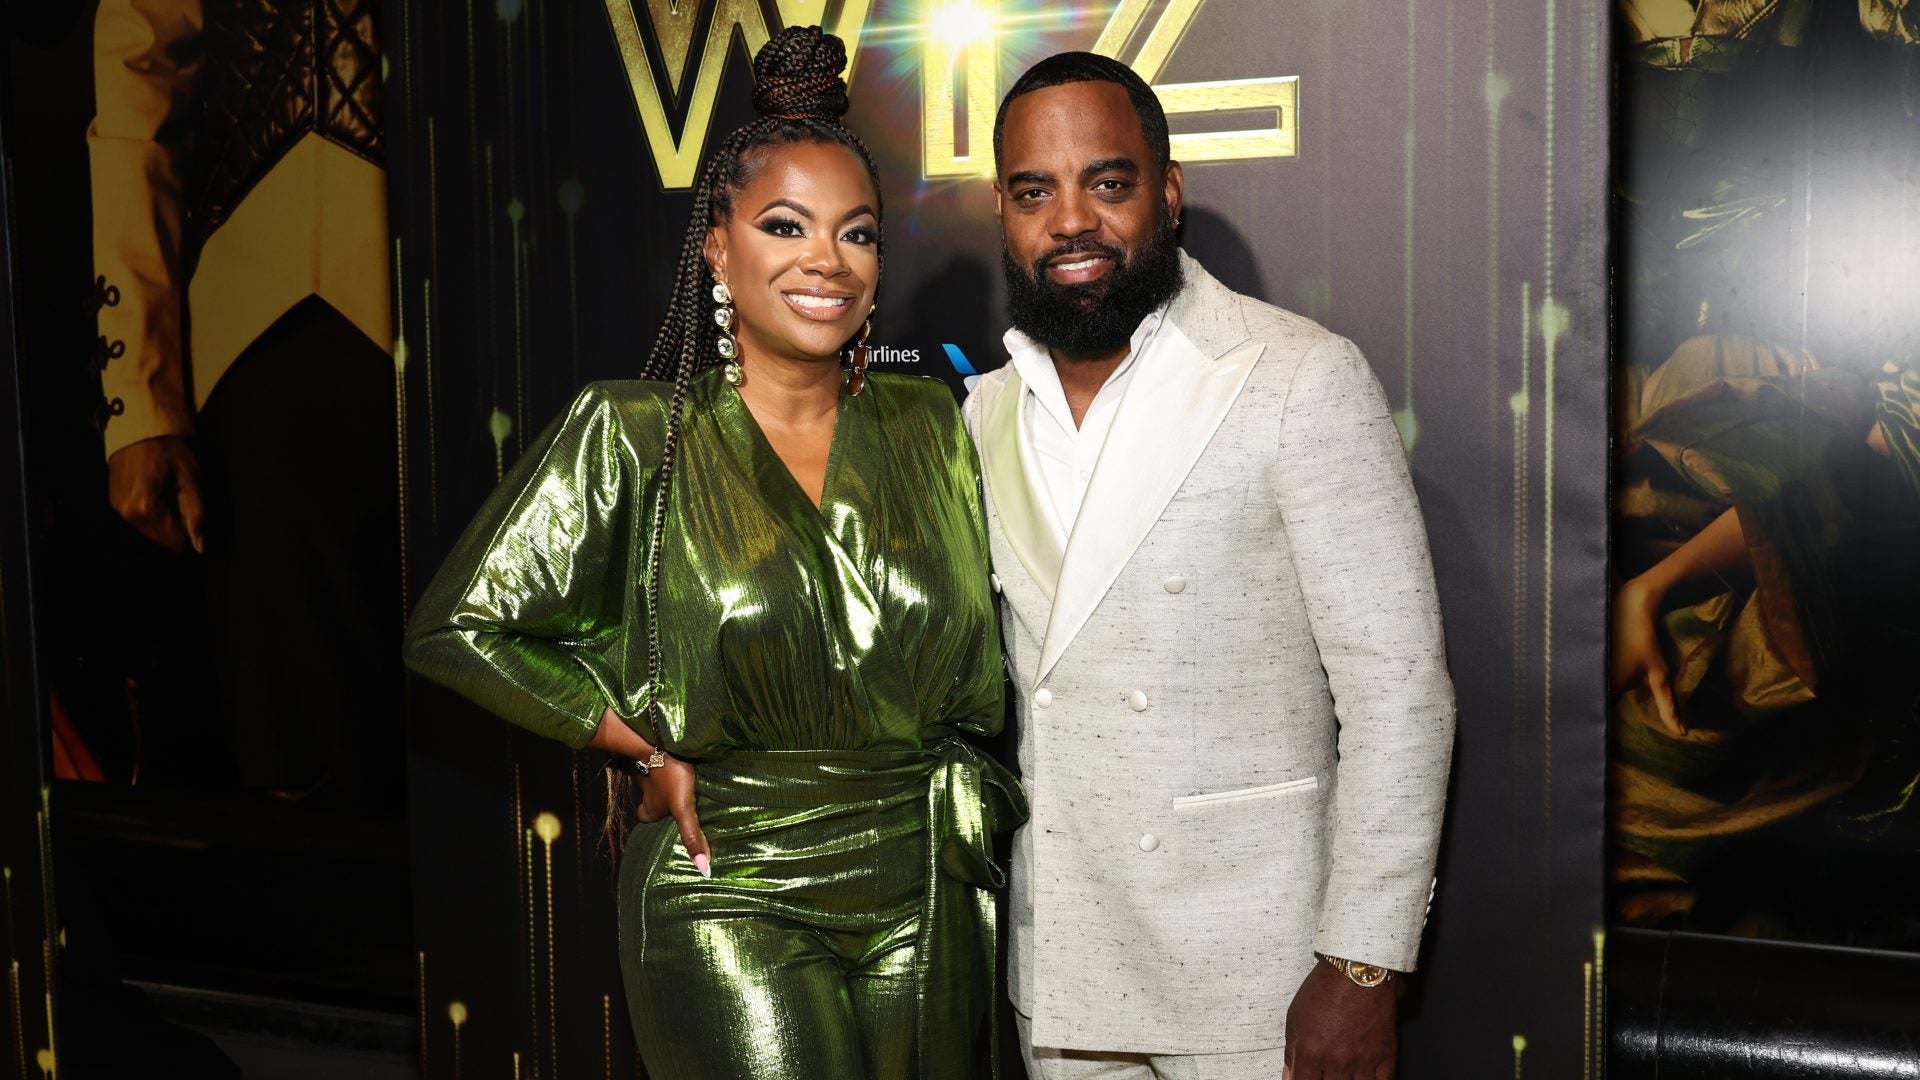 Kandi Burruss Addresses Claims That Her Marriage Is In Trouble